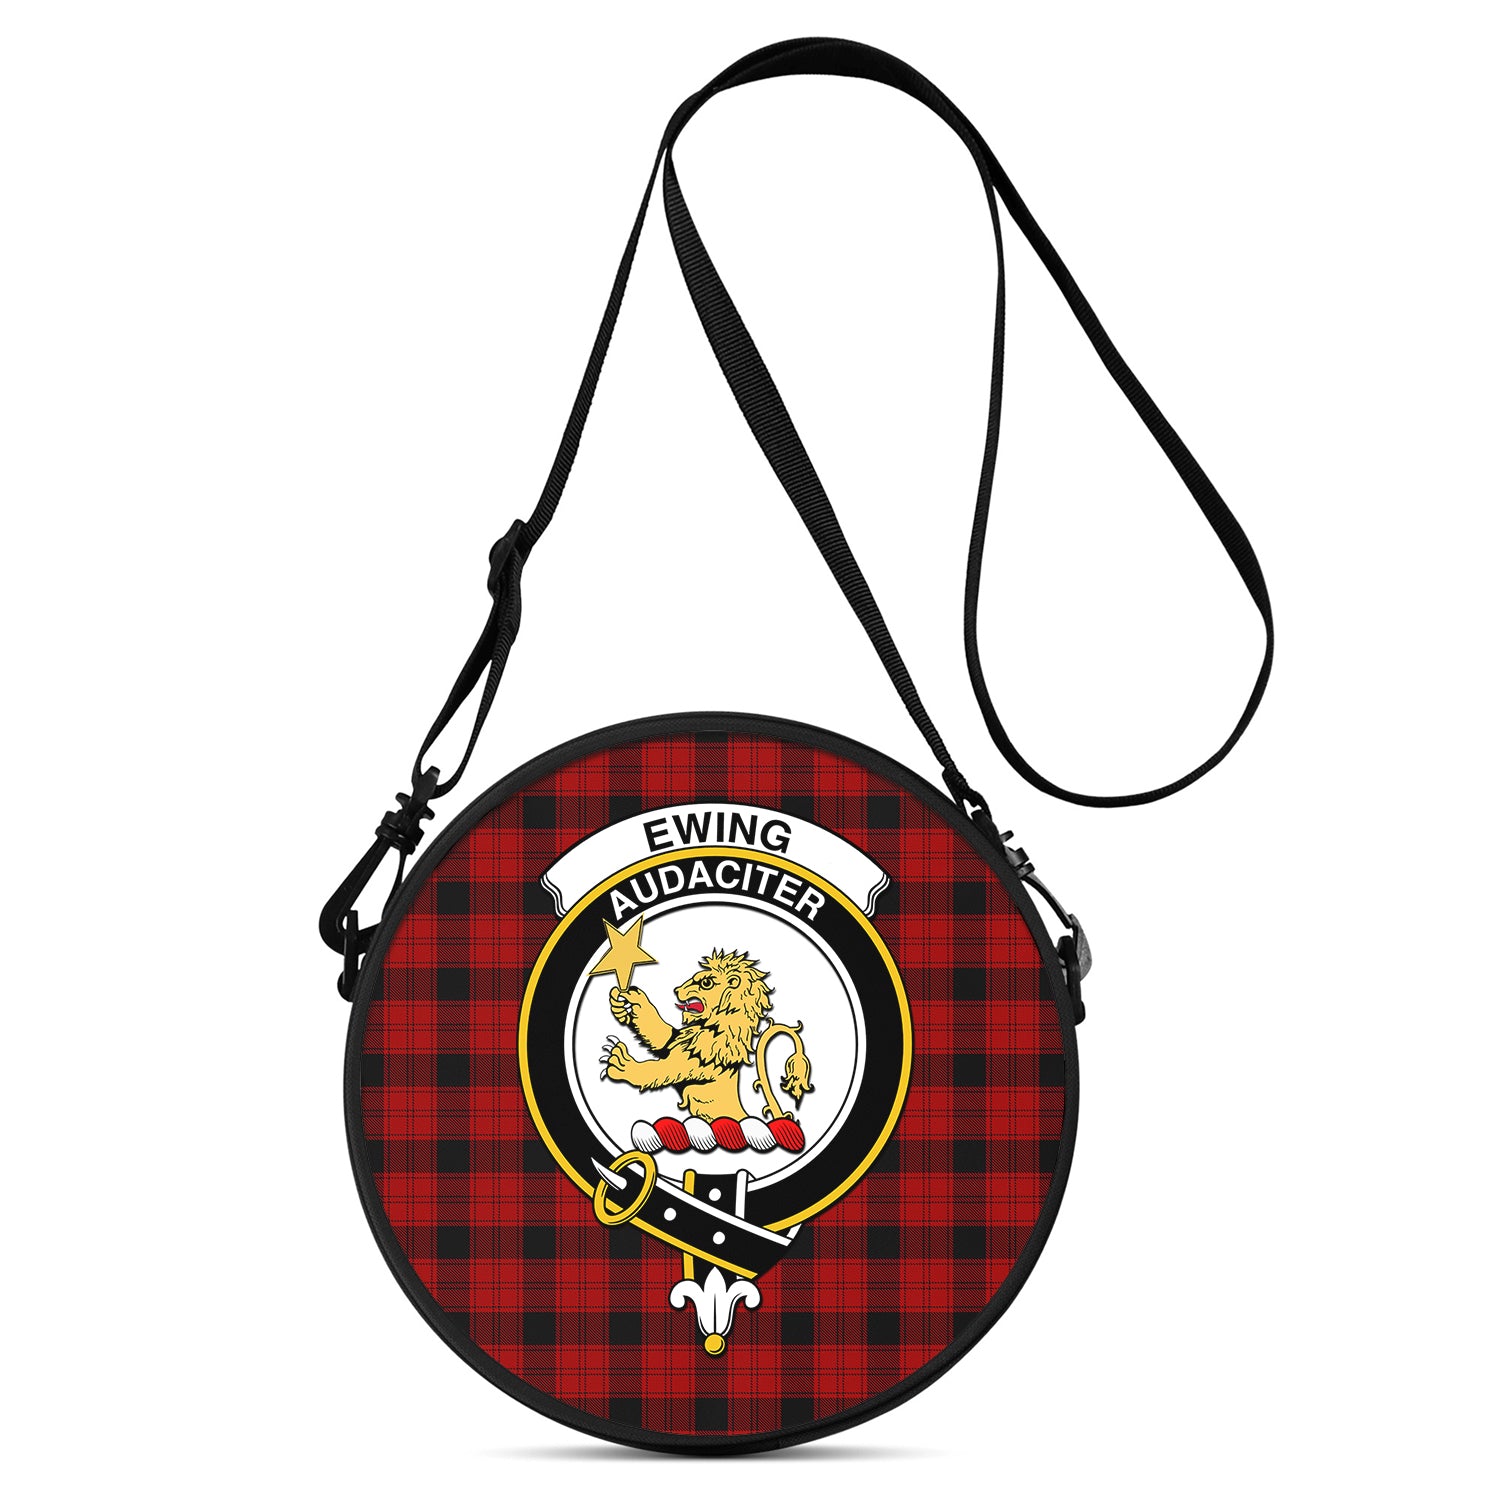 ewing-tartan-round-satchel-bags-with-family-crest